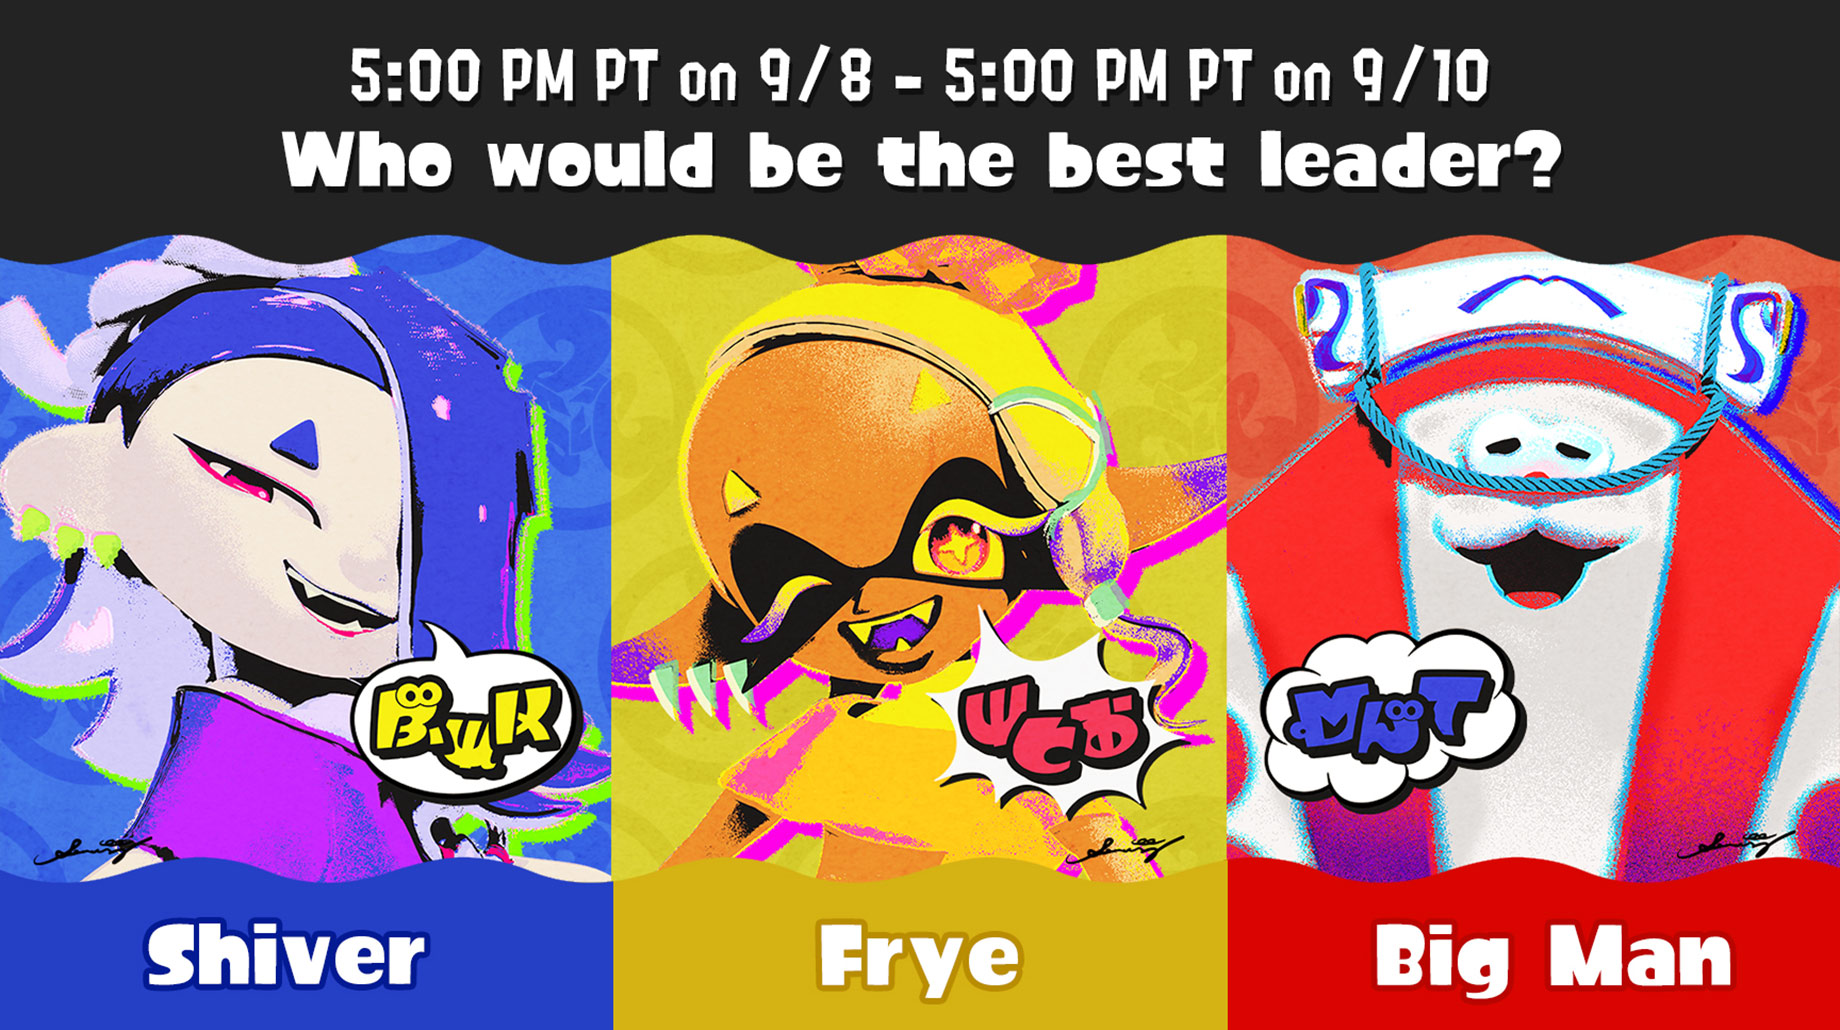 Who would be the best leader? Shiver, Frye, or Big Man?